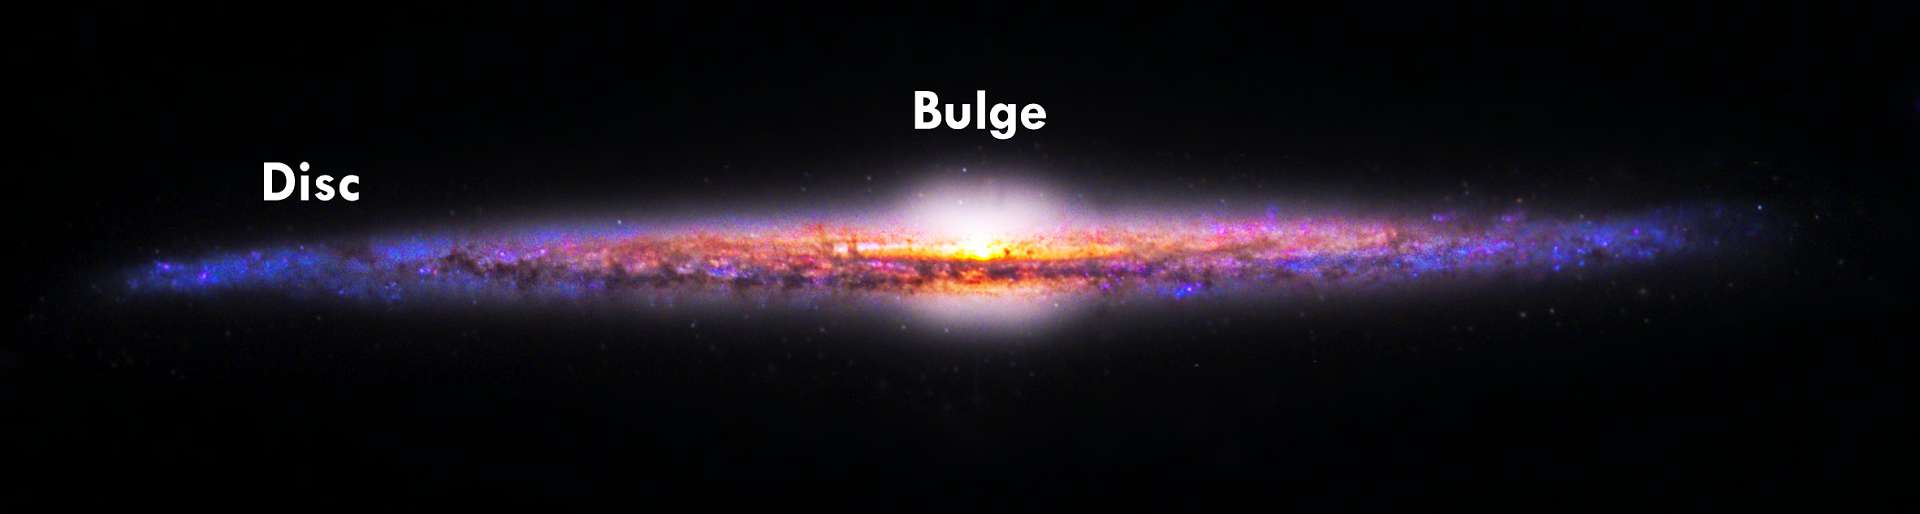 Galaxy Disc and Bulge